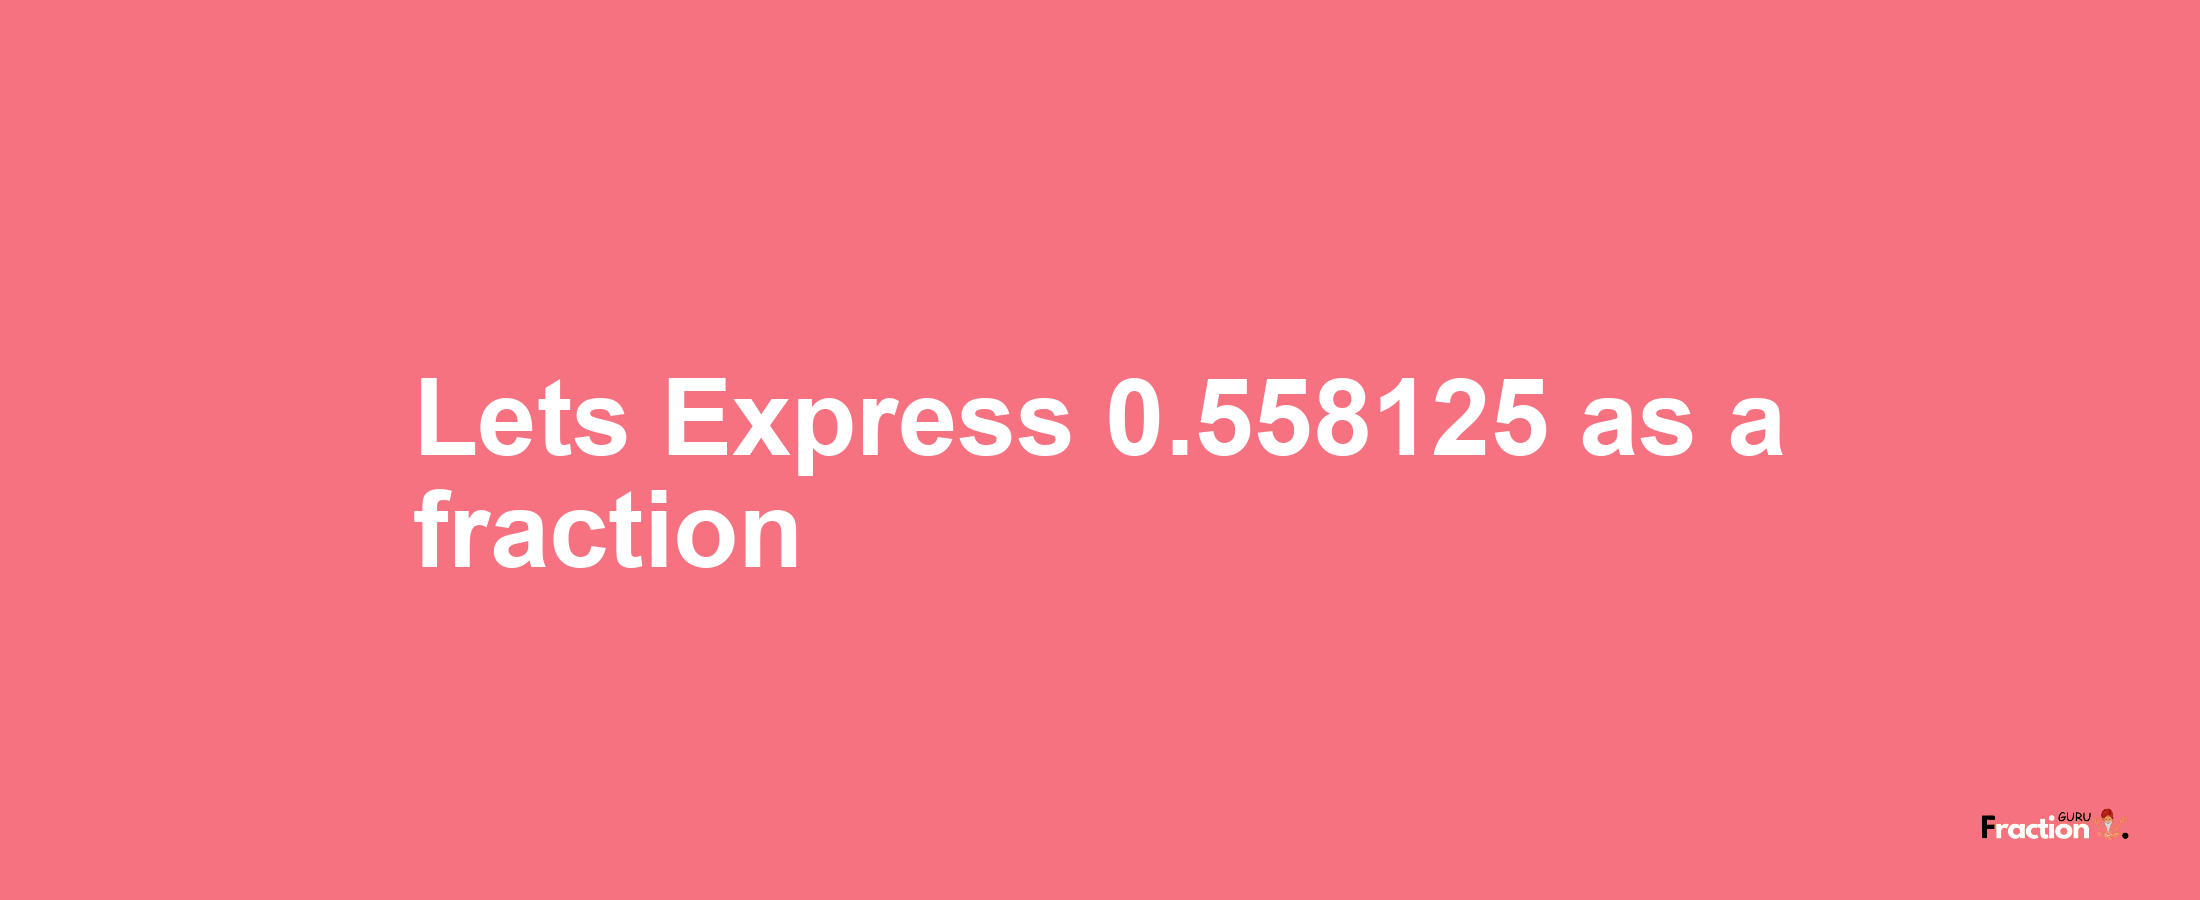 Lets Express 0.558125 as afraction